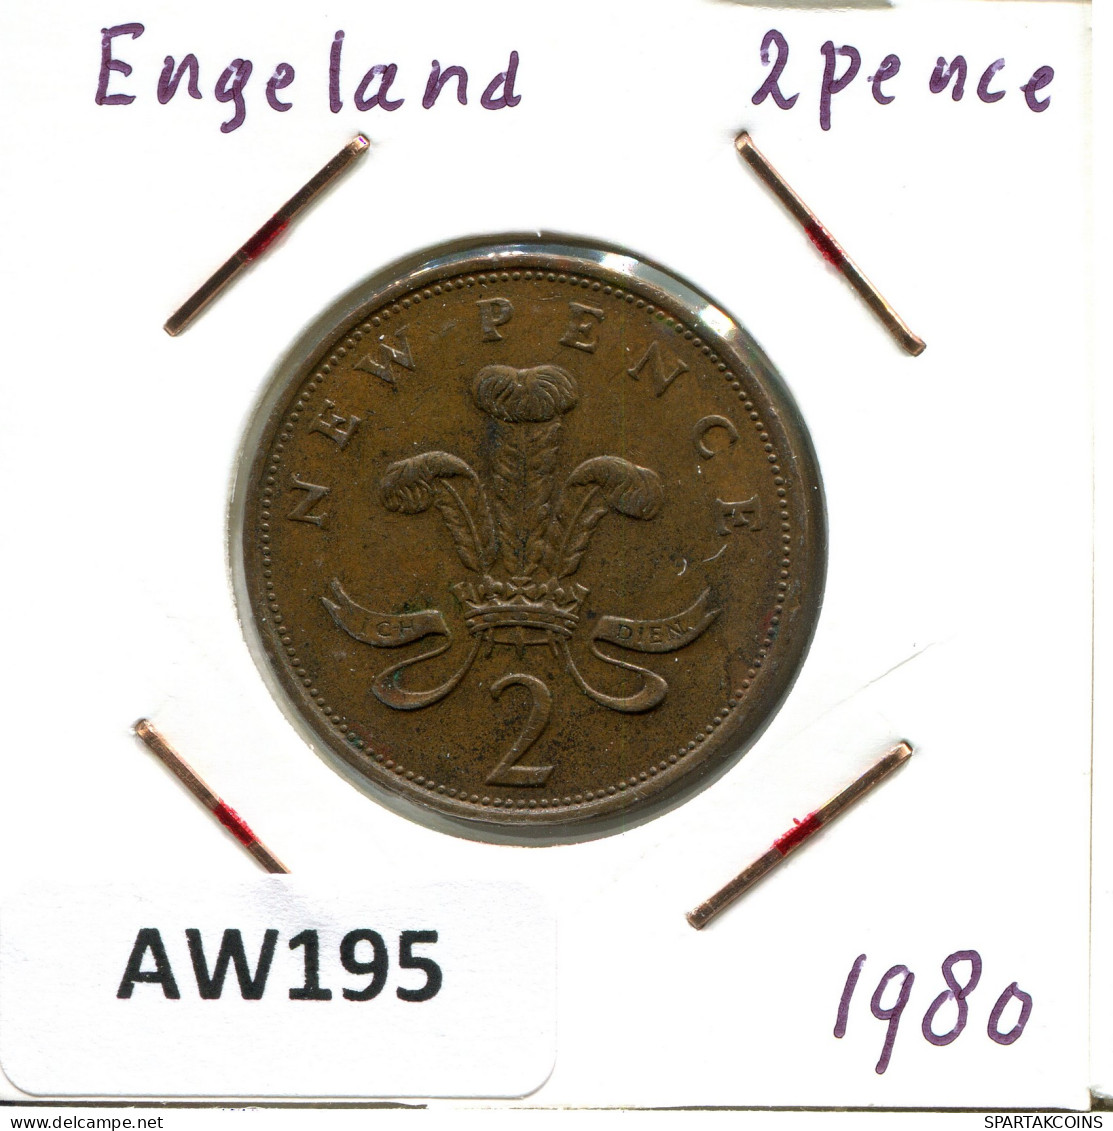 2 NEW PENCE 1980 UK GRANDE-BRETAGNE GREAT BRITAIN Pièce #AW195.F - 2 Pence & 2 New Pence